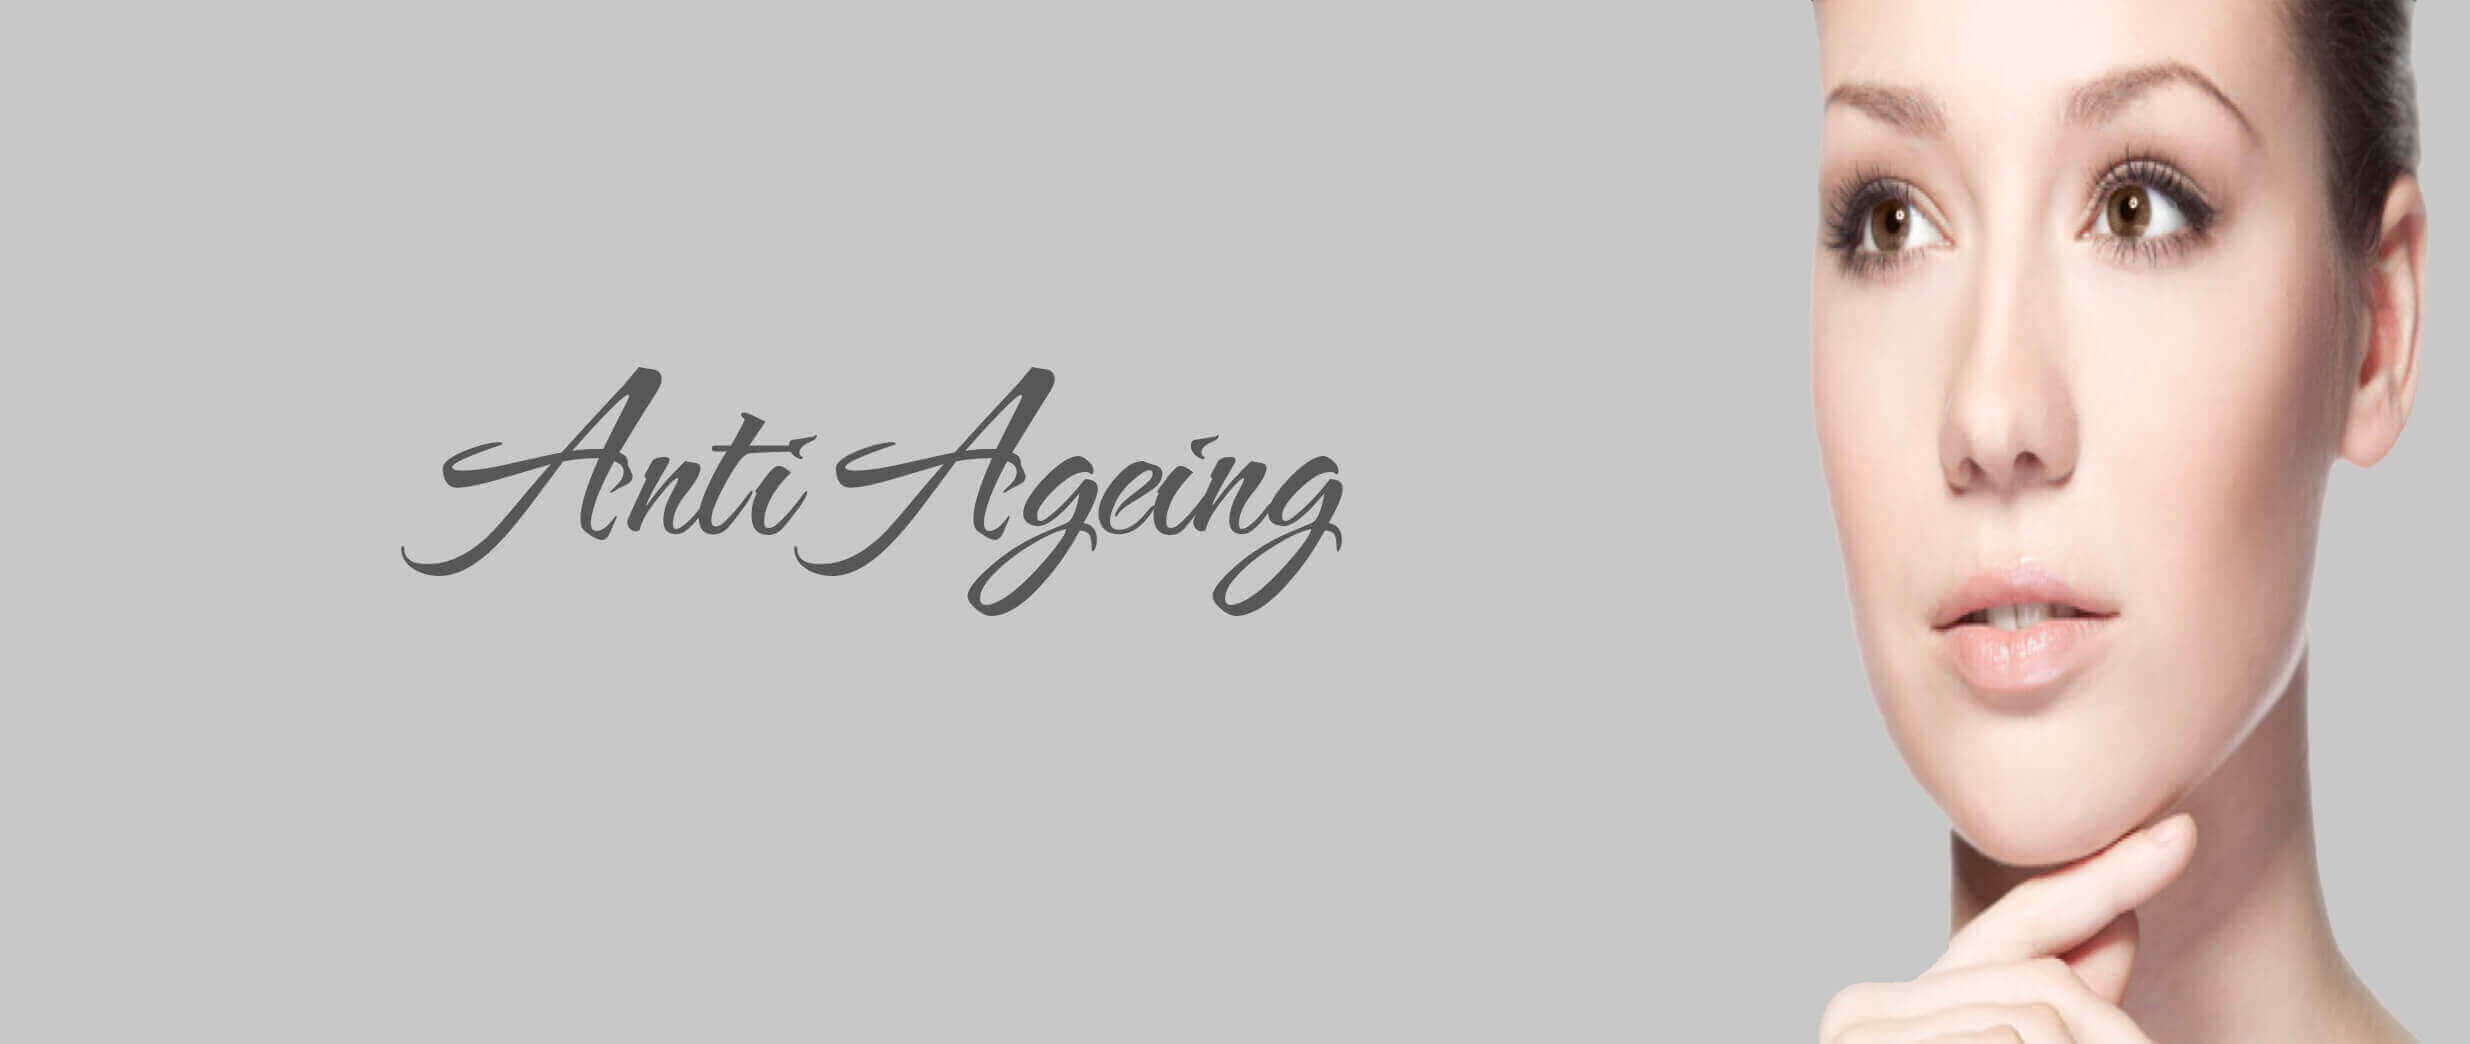 Anti ageing treatment – to look younger and beautiful